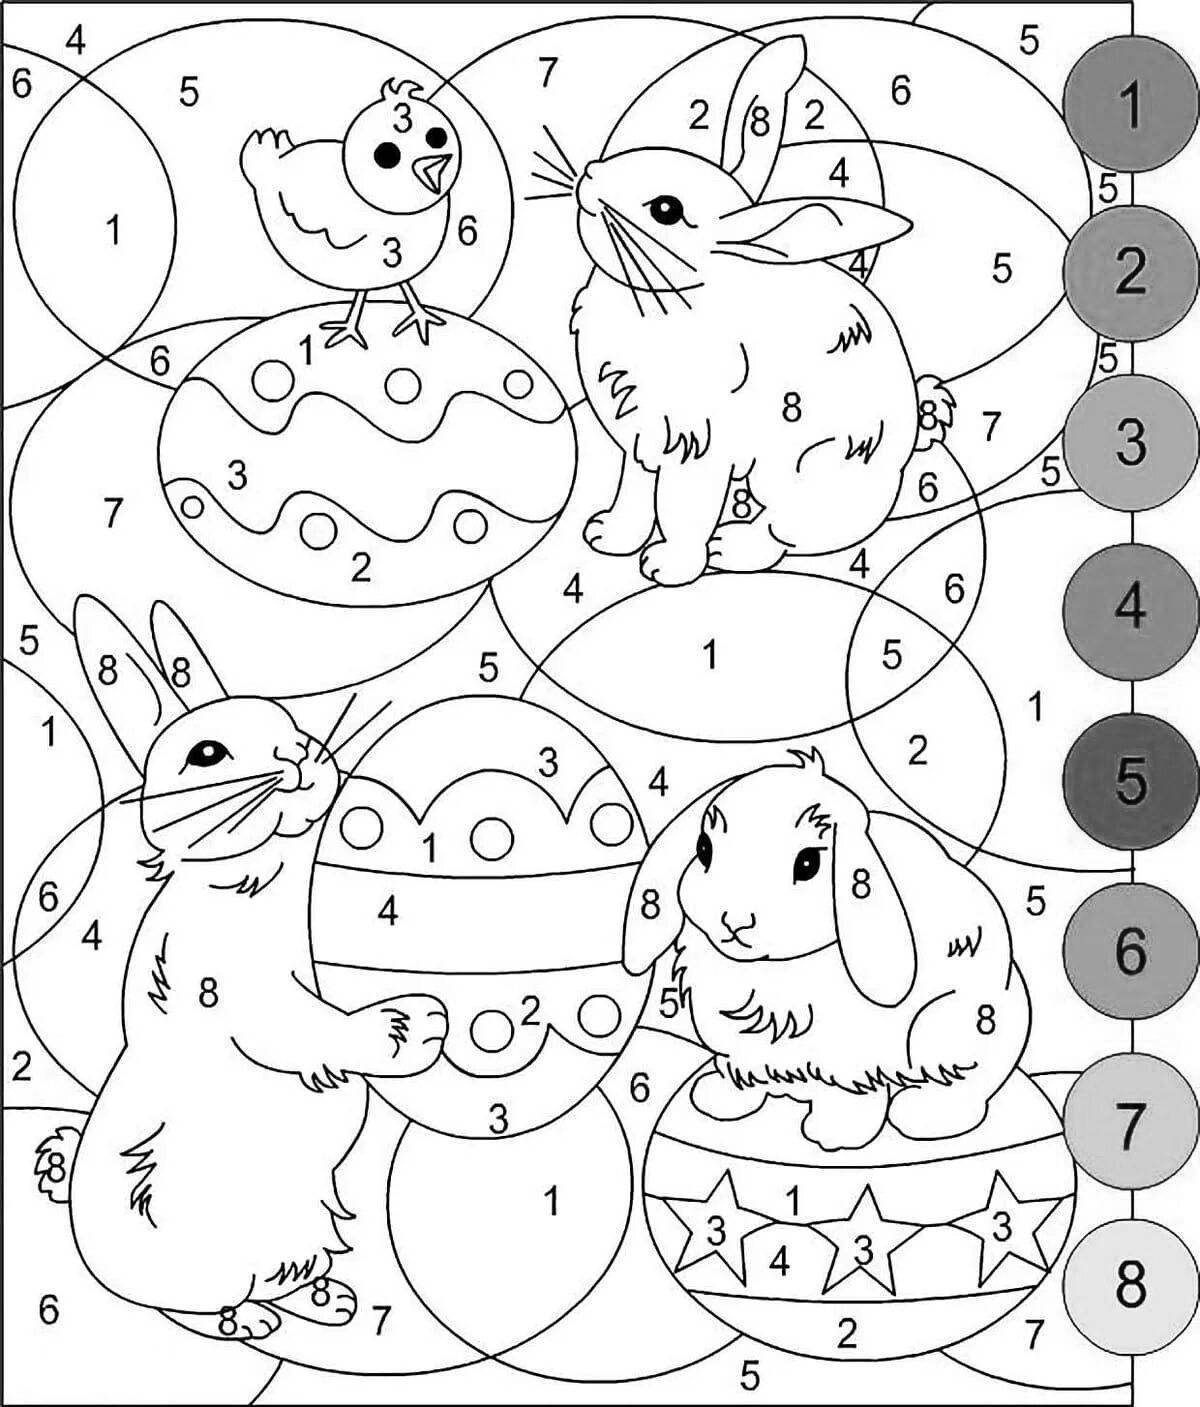 Sweet animal coloring by numbers